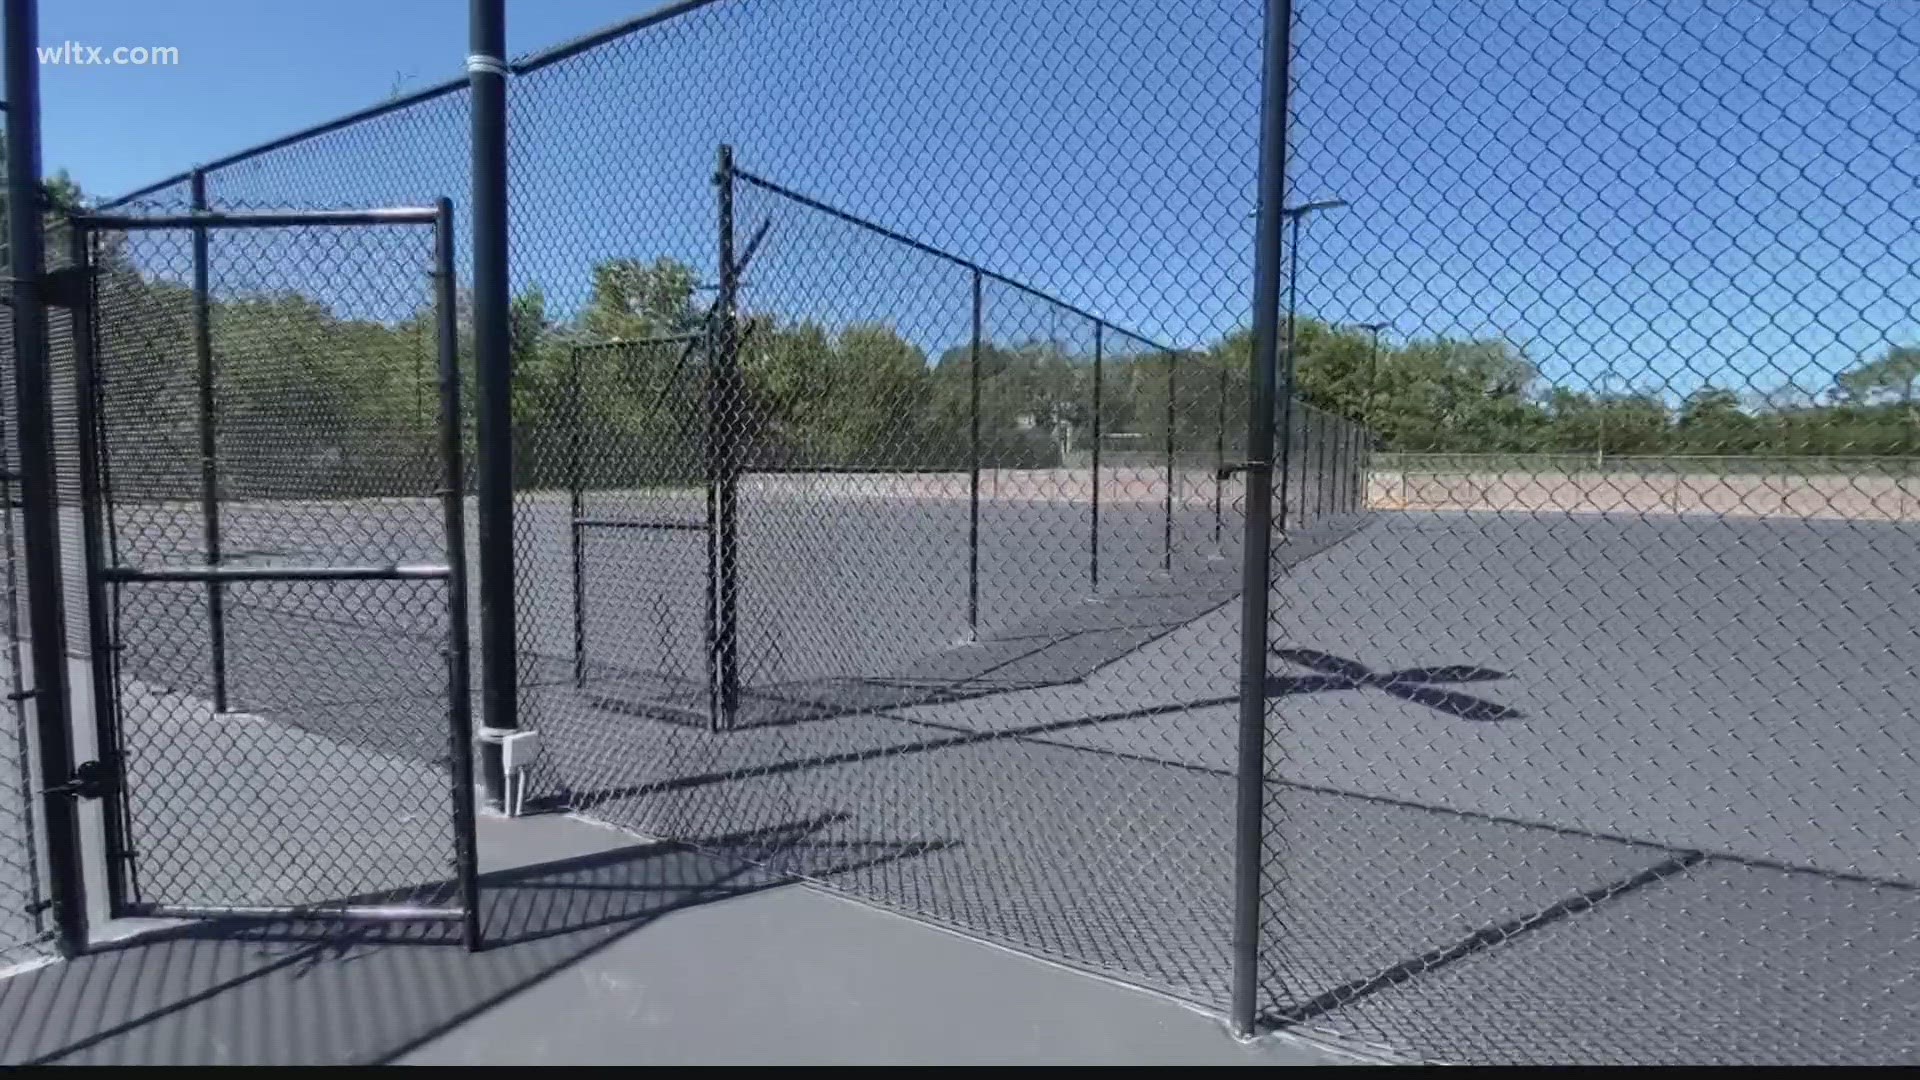 New tennis courts and the first ever pickleball courts are under construction in Lee county.